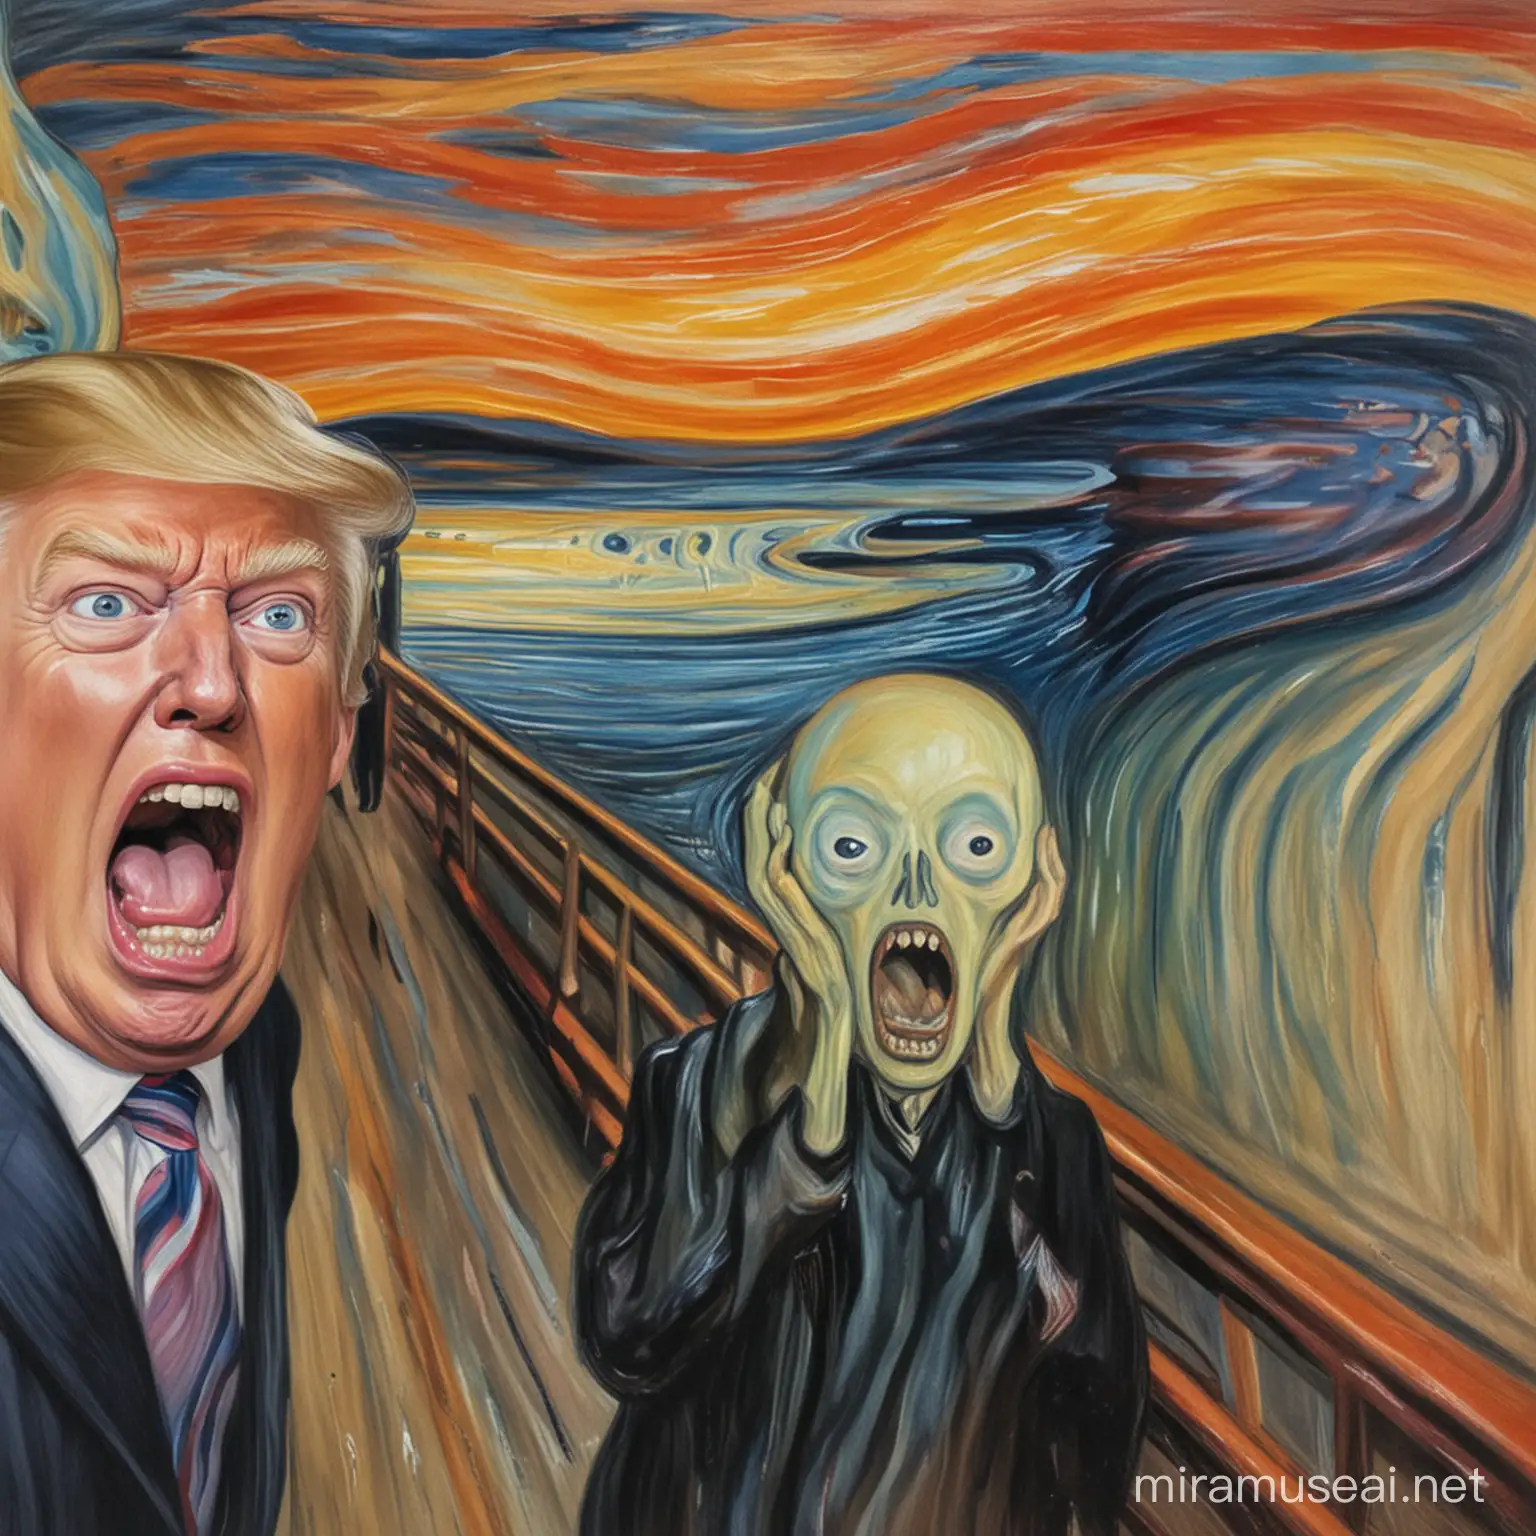 Edvard Munch's painting 'the scream' featuring Donald Trump screaming in agony